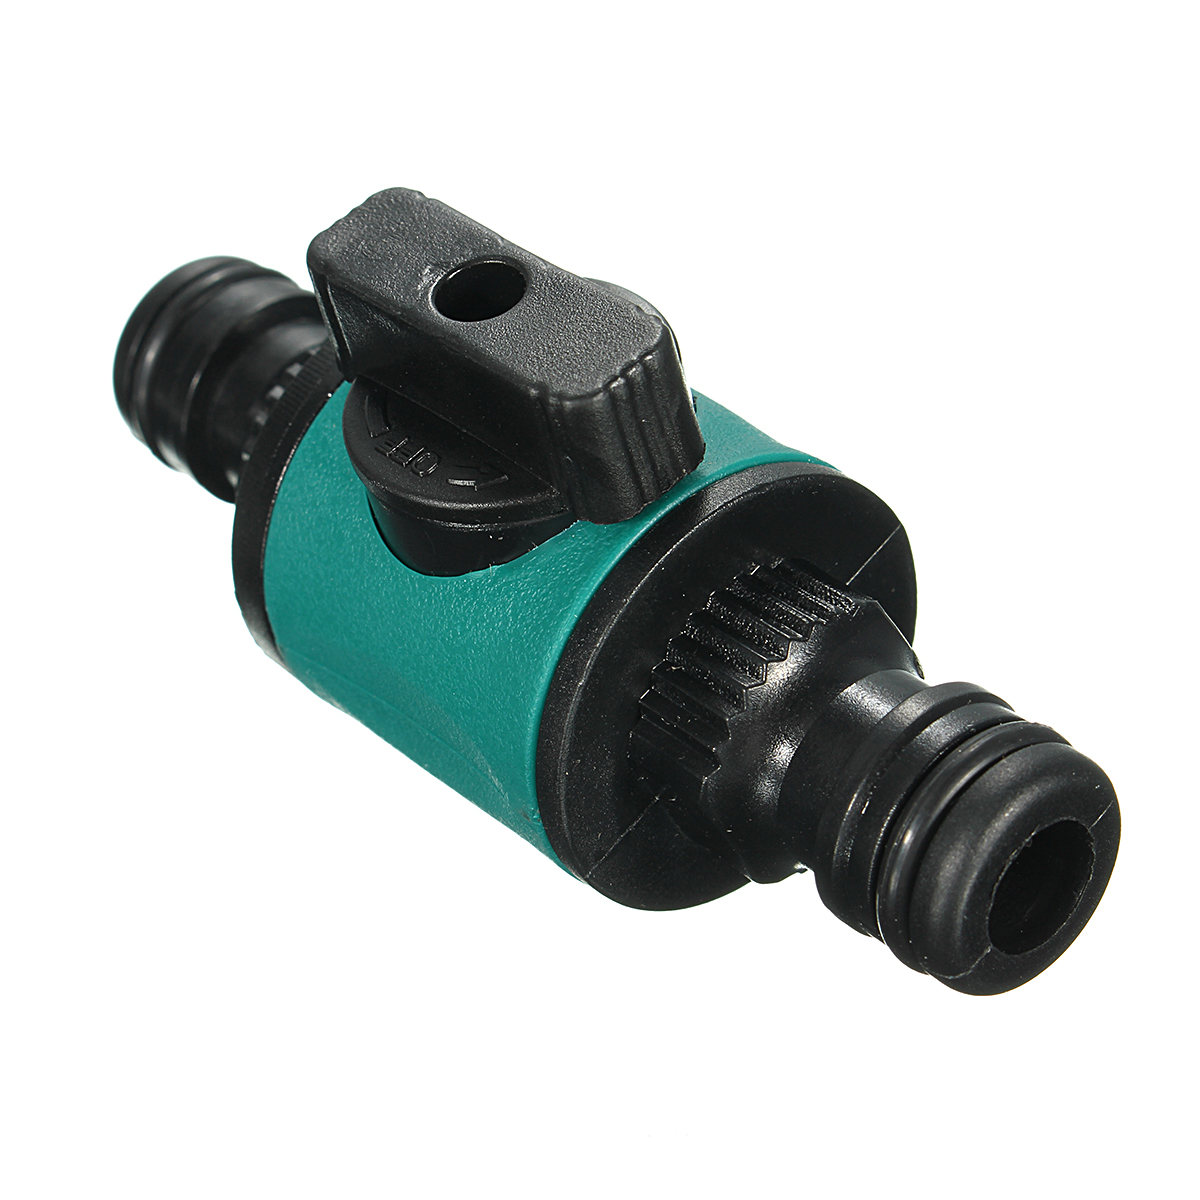 Garden-Hose-Tap-Pipe-Compatible-12-2-Way-Connector-Valve-Convertor-Fitting-Adapter-Tool-1290232-3